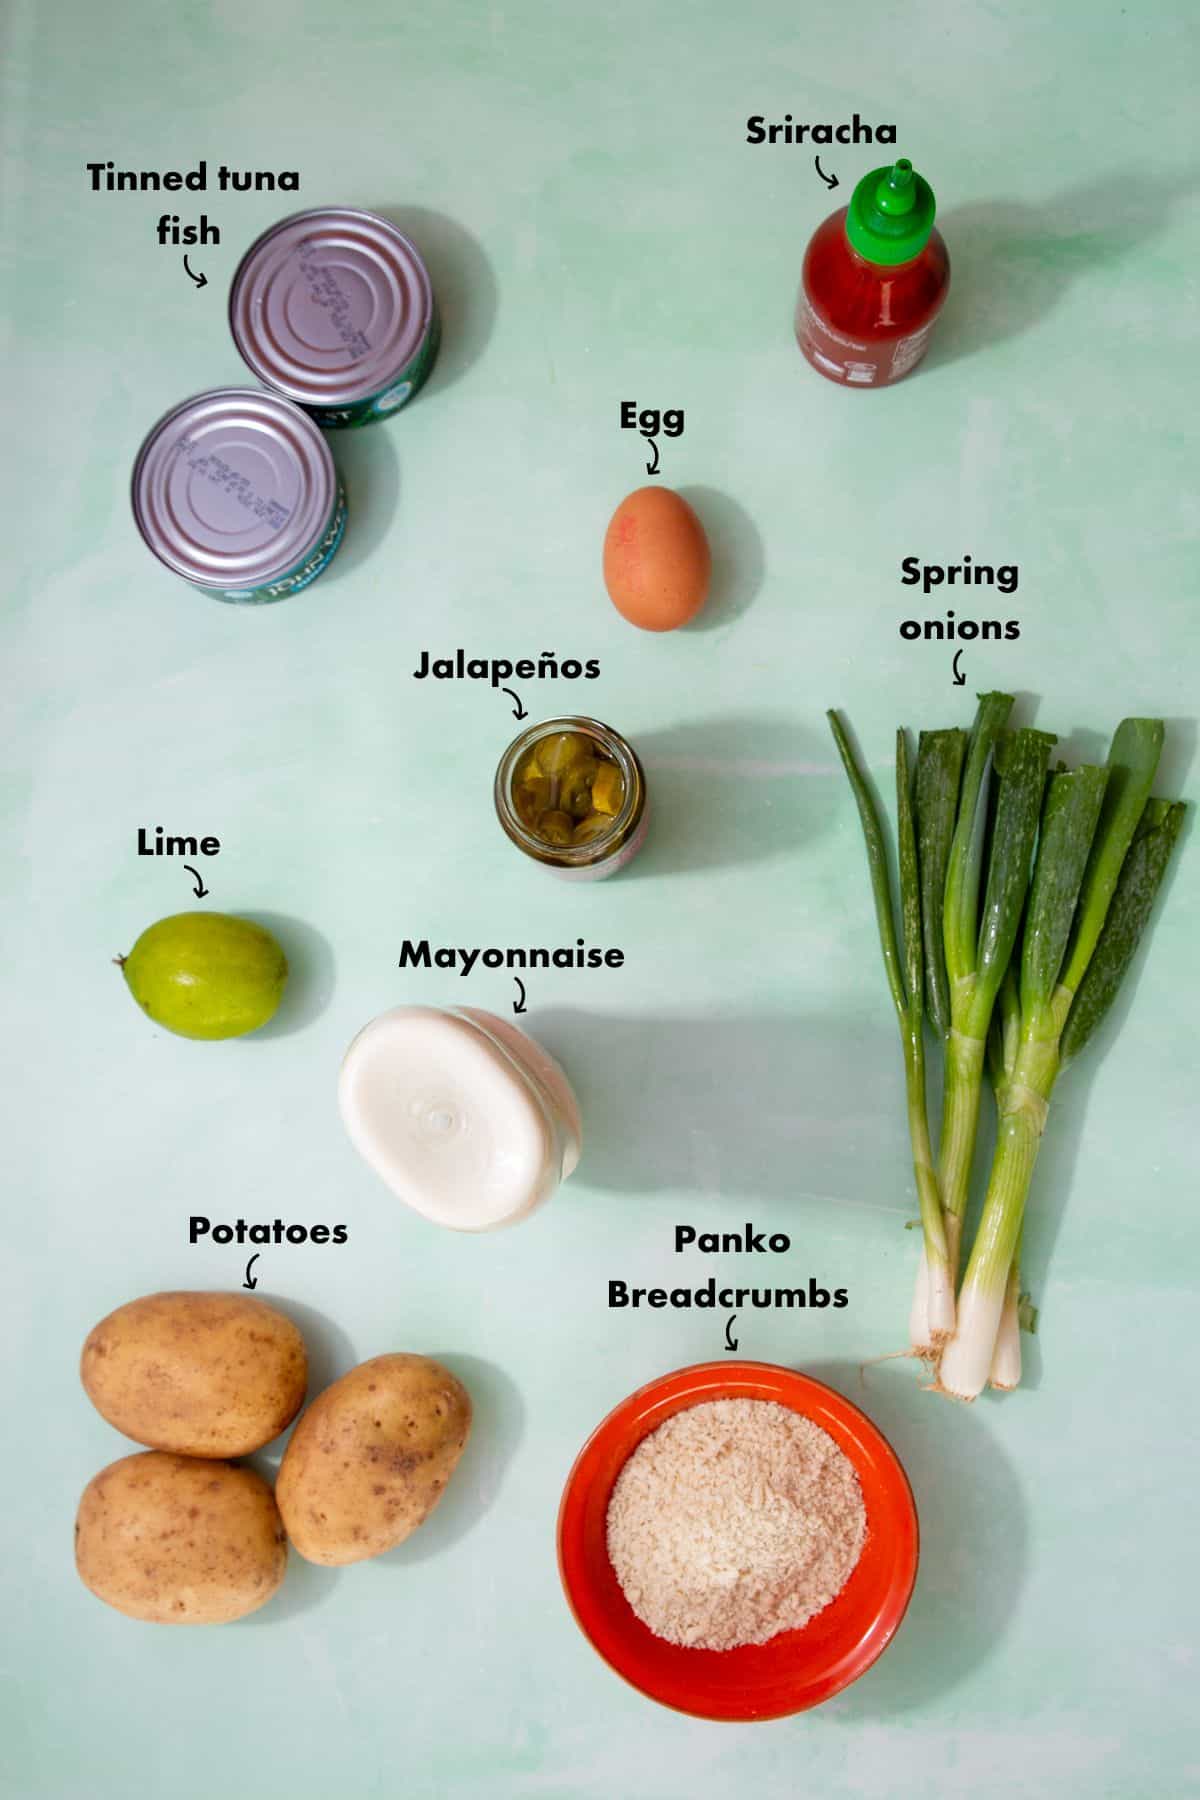 Ingredients to make the tuna fishcakes laid out on a pale blue background and labelled.